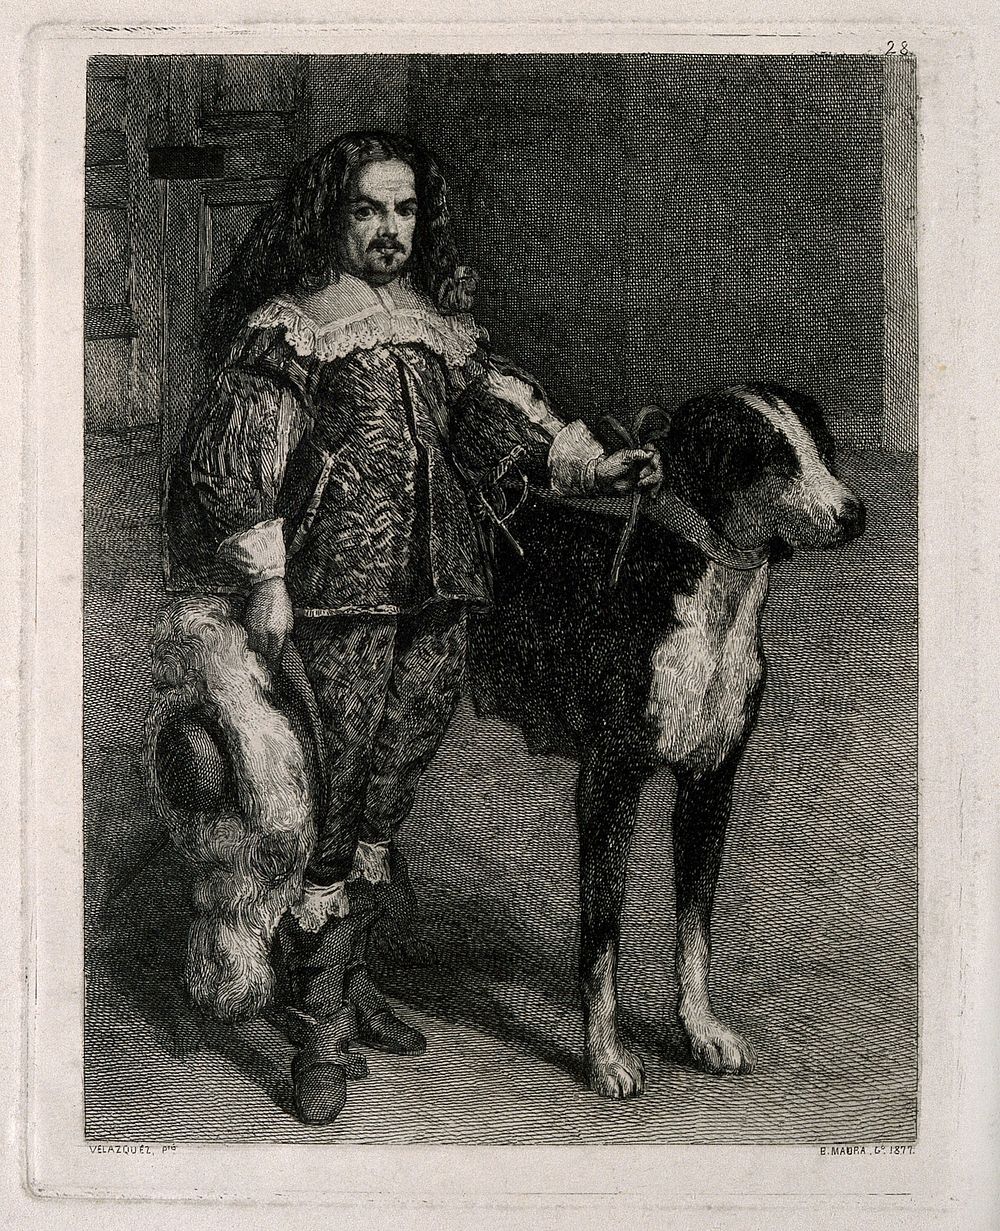 Don Antonio, a dwarf to Philip IV. Etching by B. Maura y Montaner, 1877, after D. Velazquez.